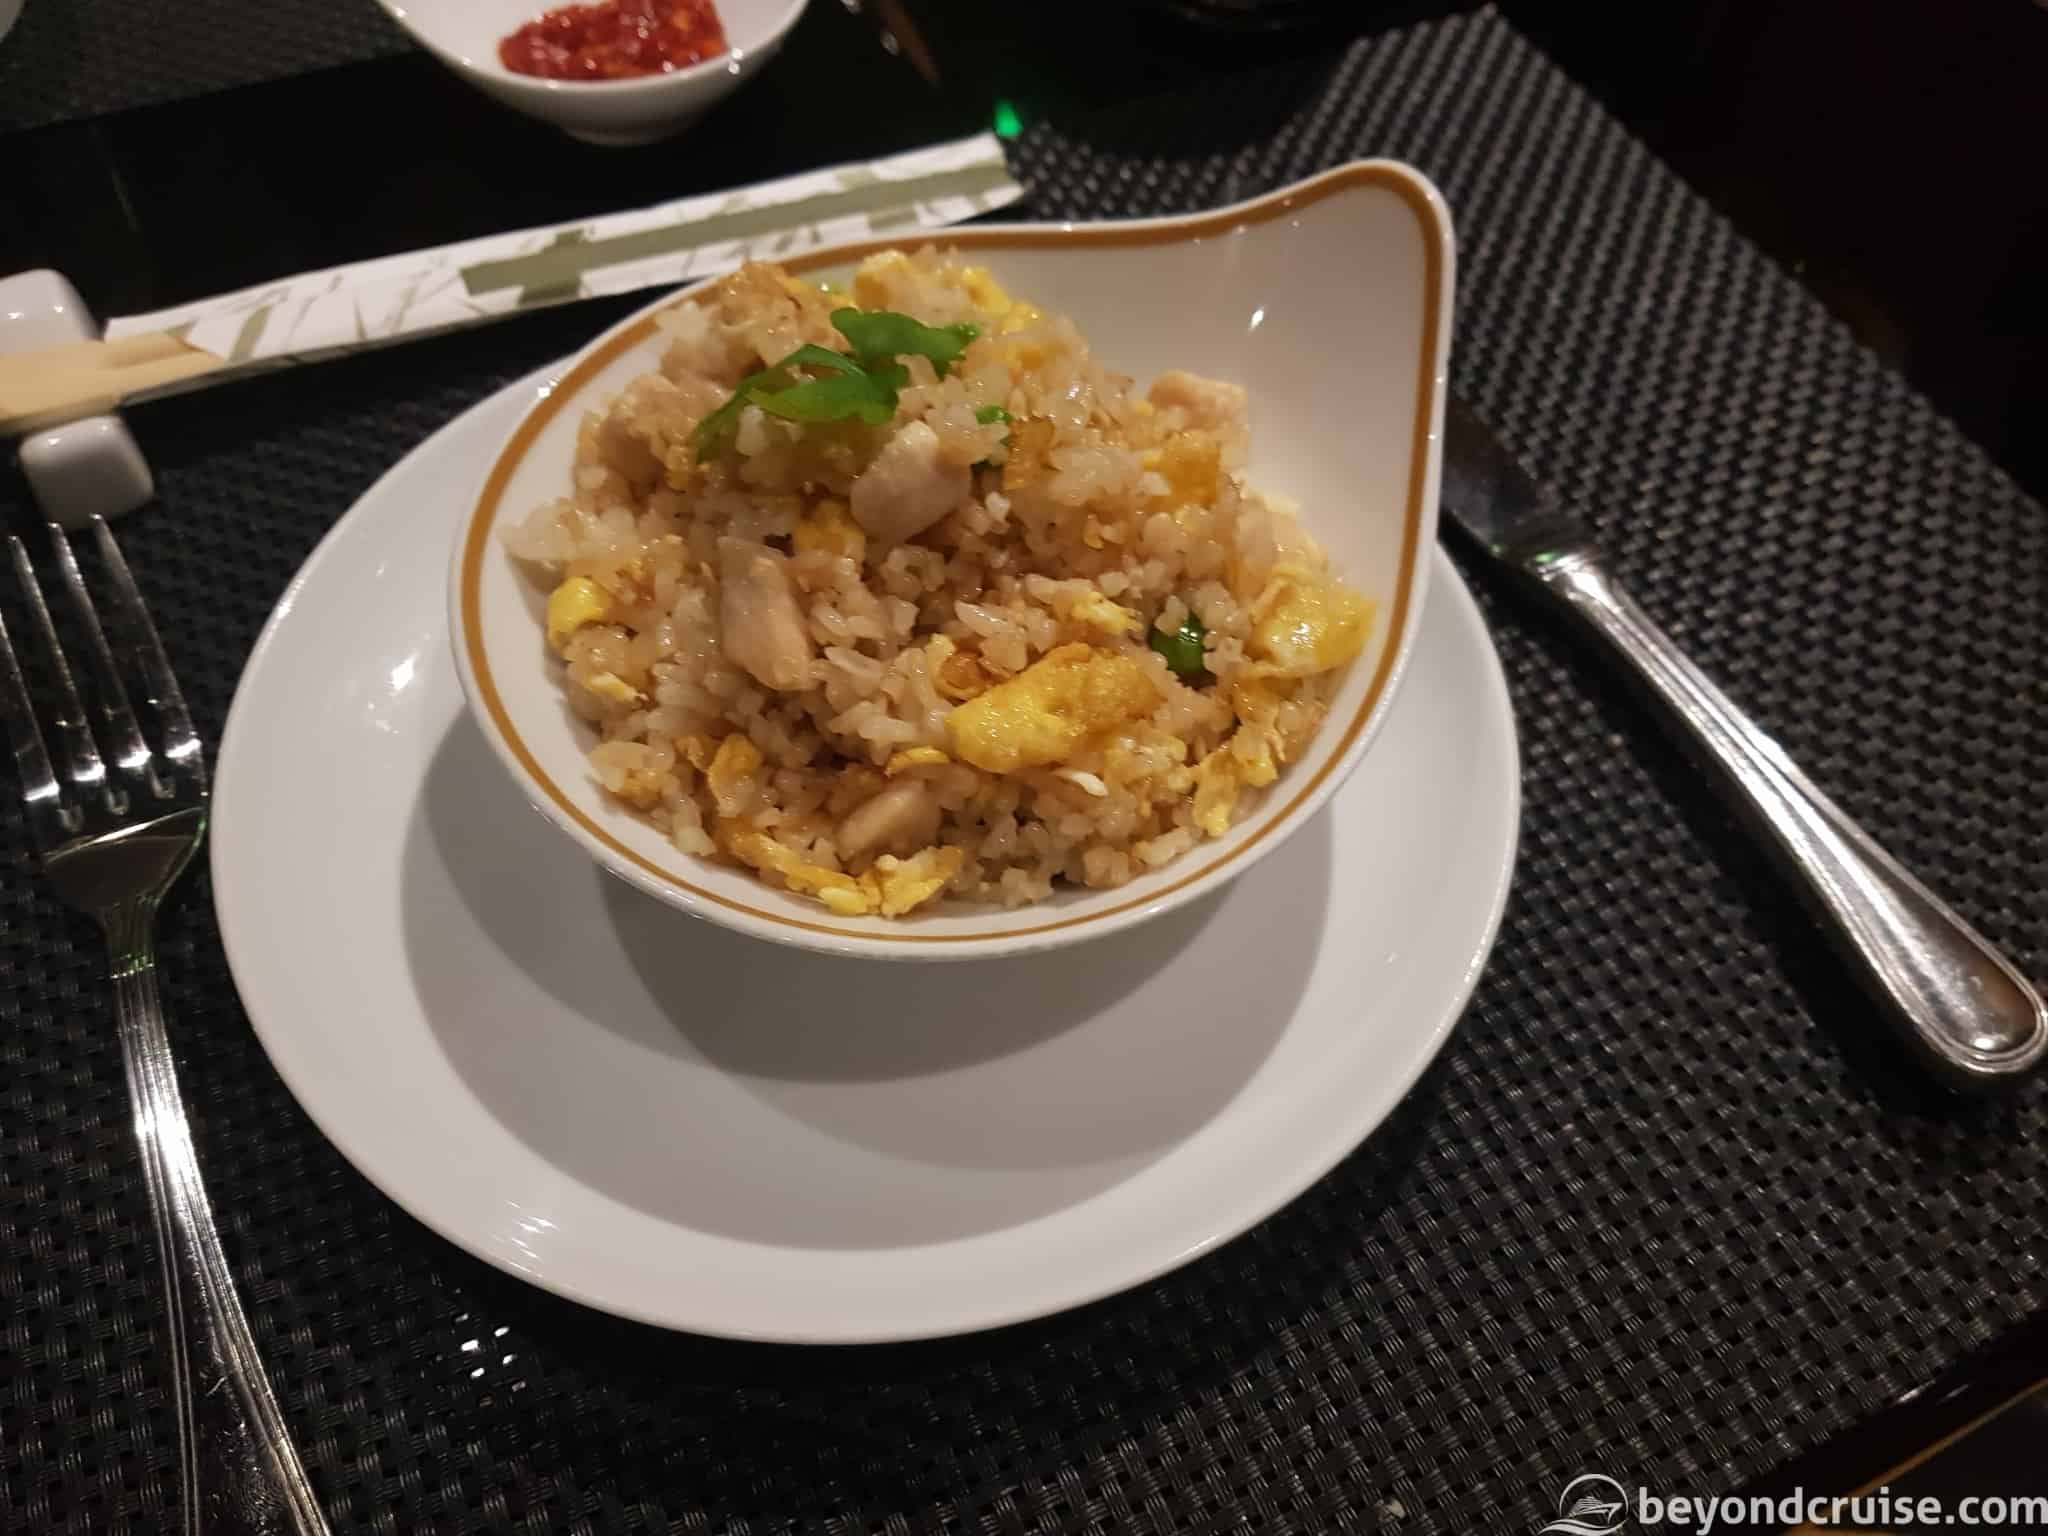 Oriental Plaza - Cantonese fried rice